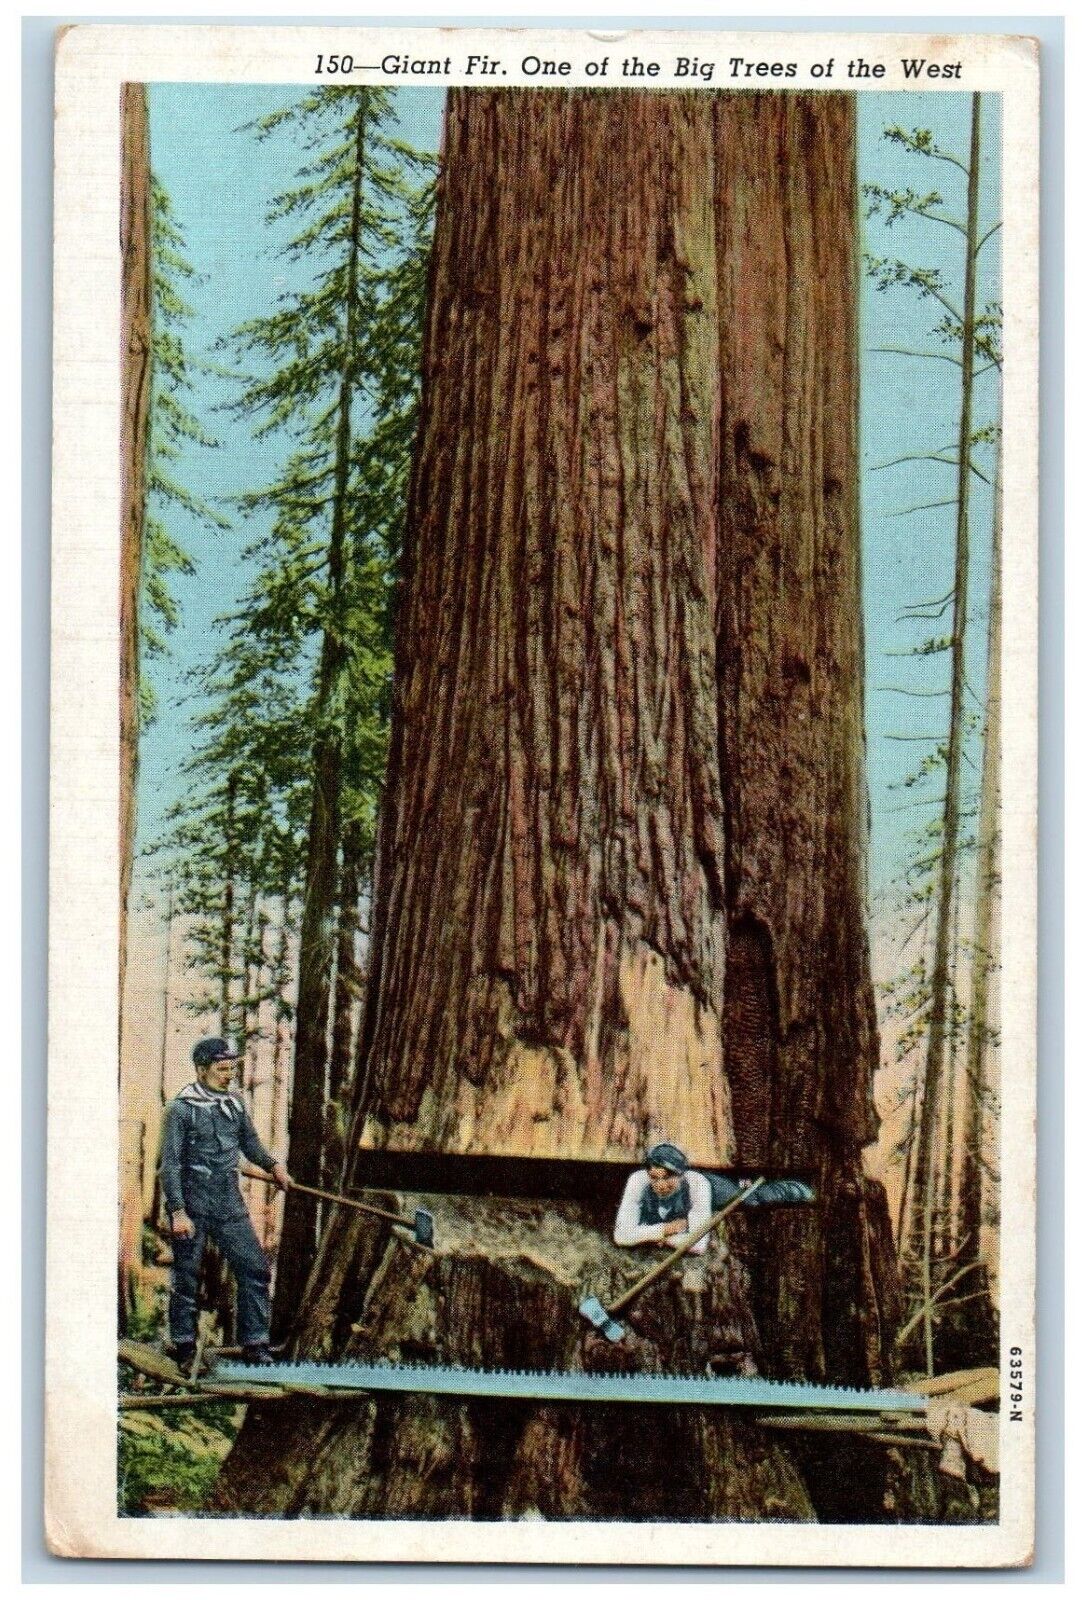 Washington WA Postcard Giant Fir One Of The Big Trees Of The West Logging c1930s